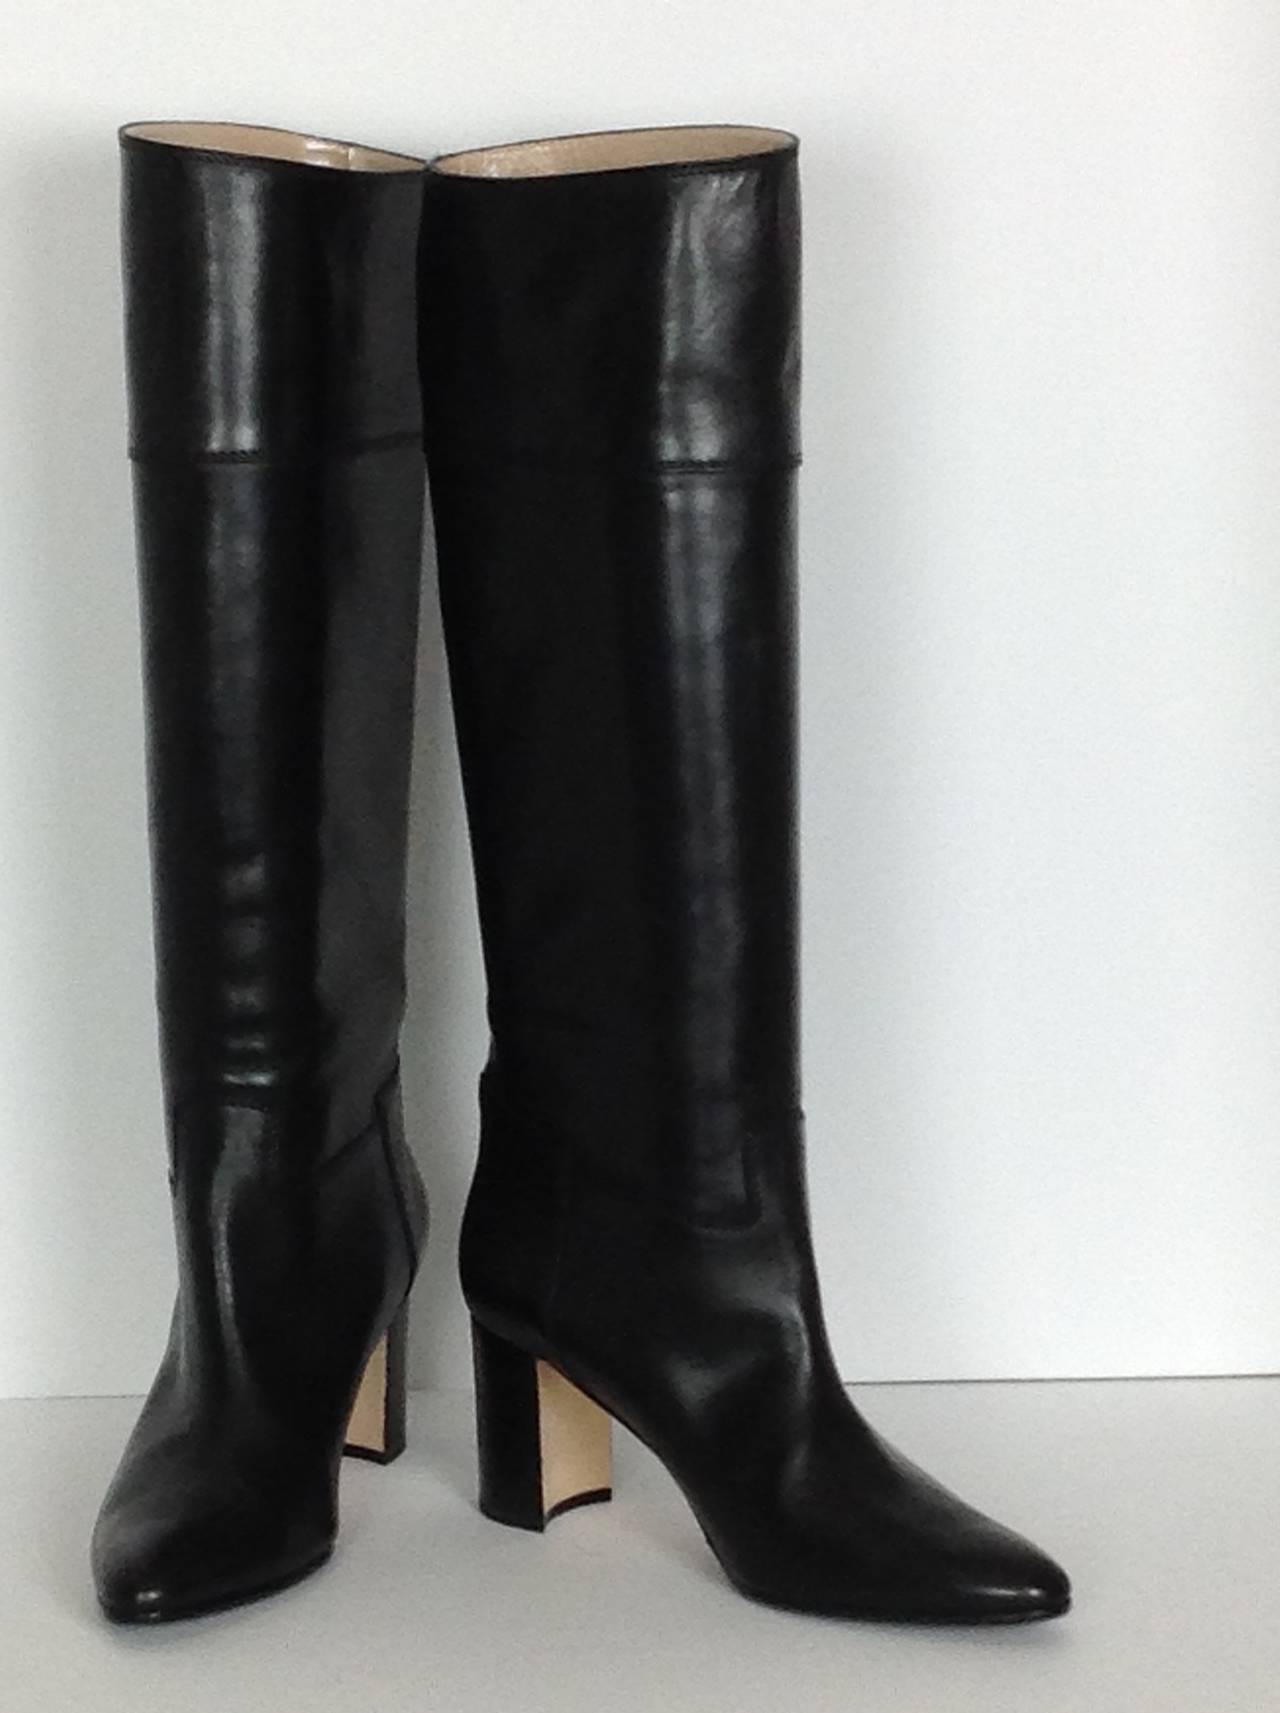 NEW Manolo Blahnik equestrian leather boots                Size 39 1/2 2